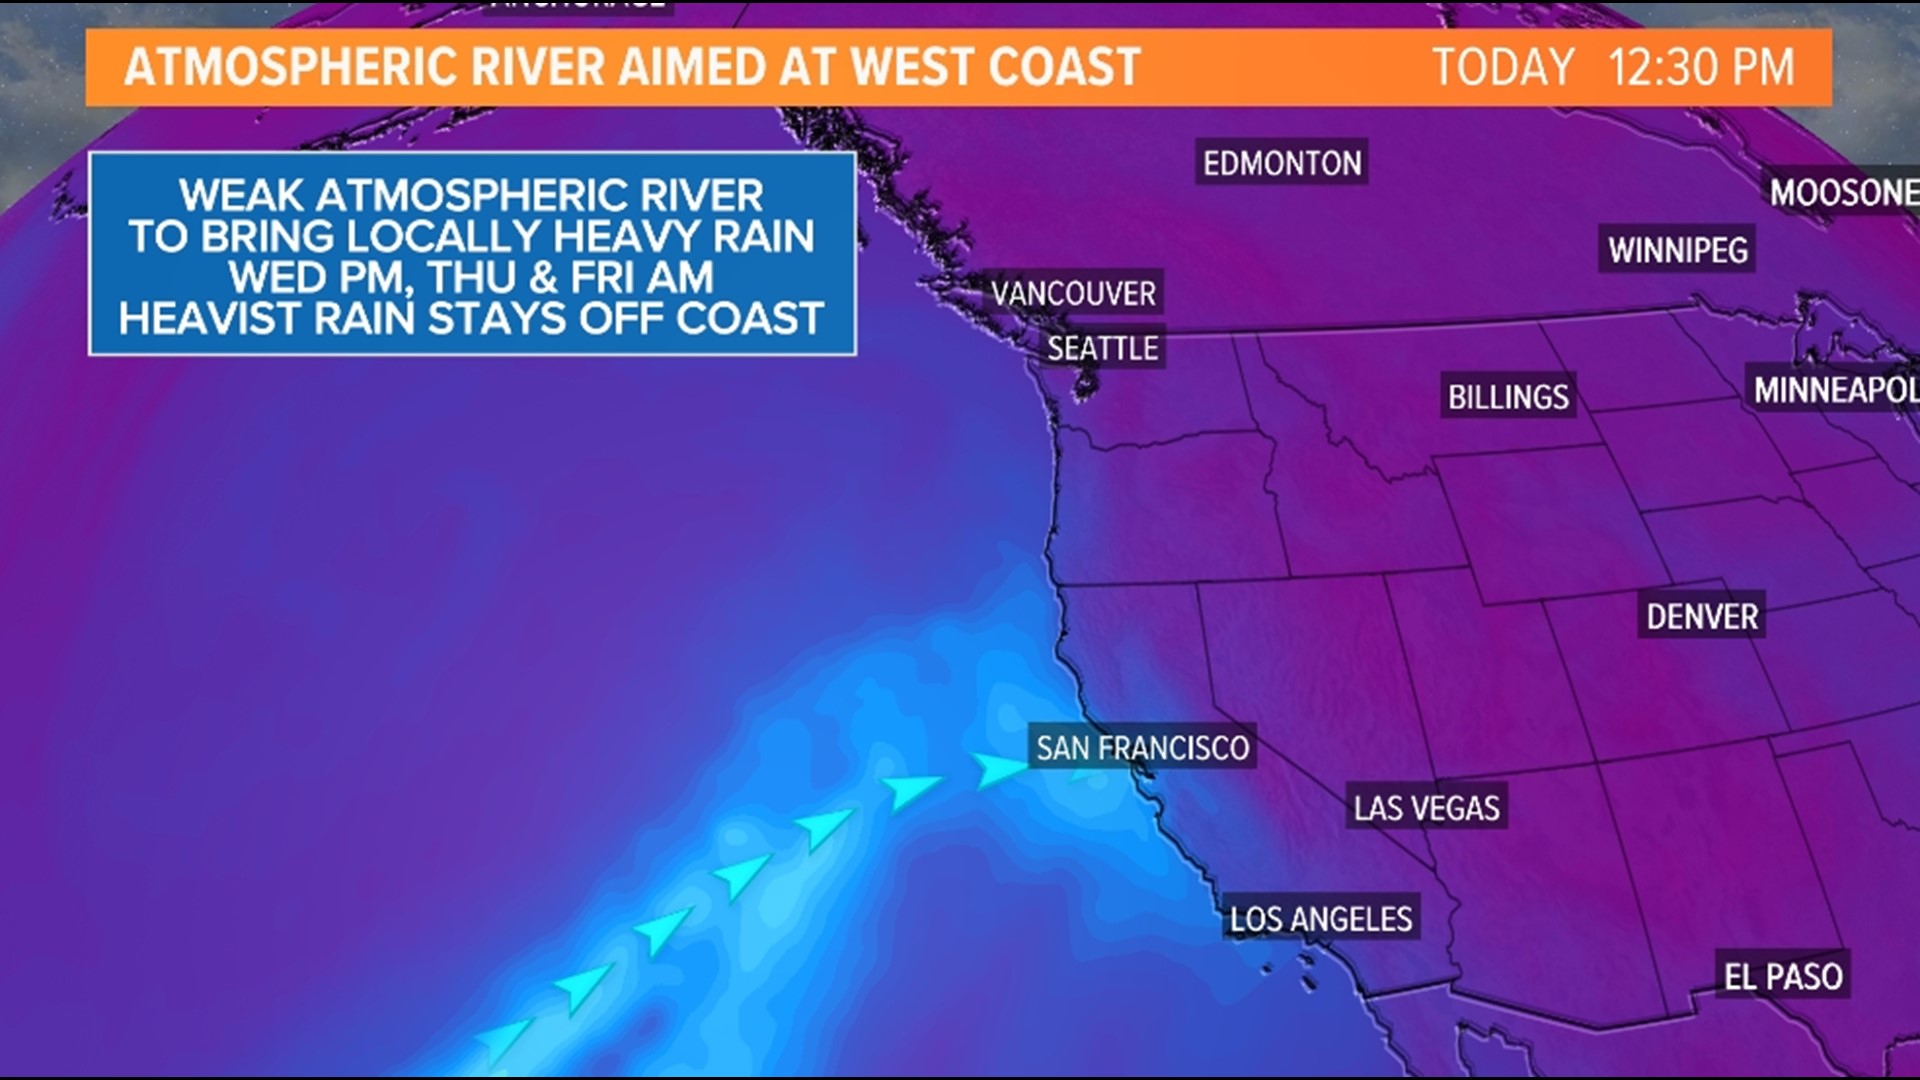 Tracking the atmospheric river